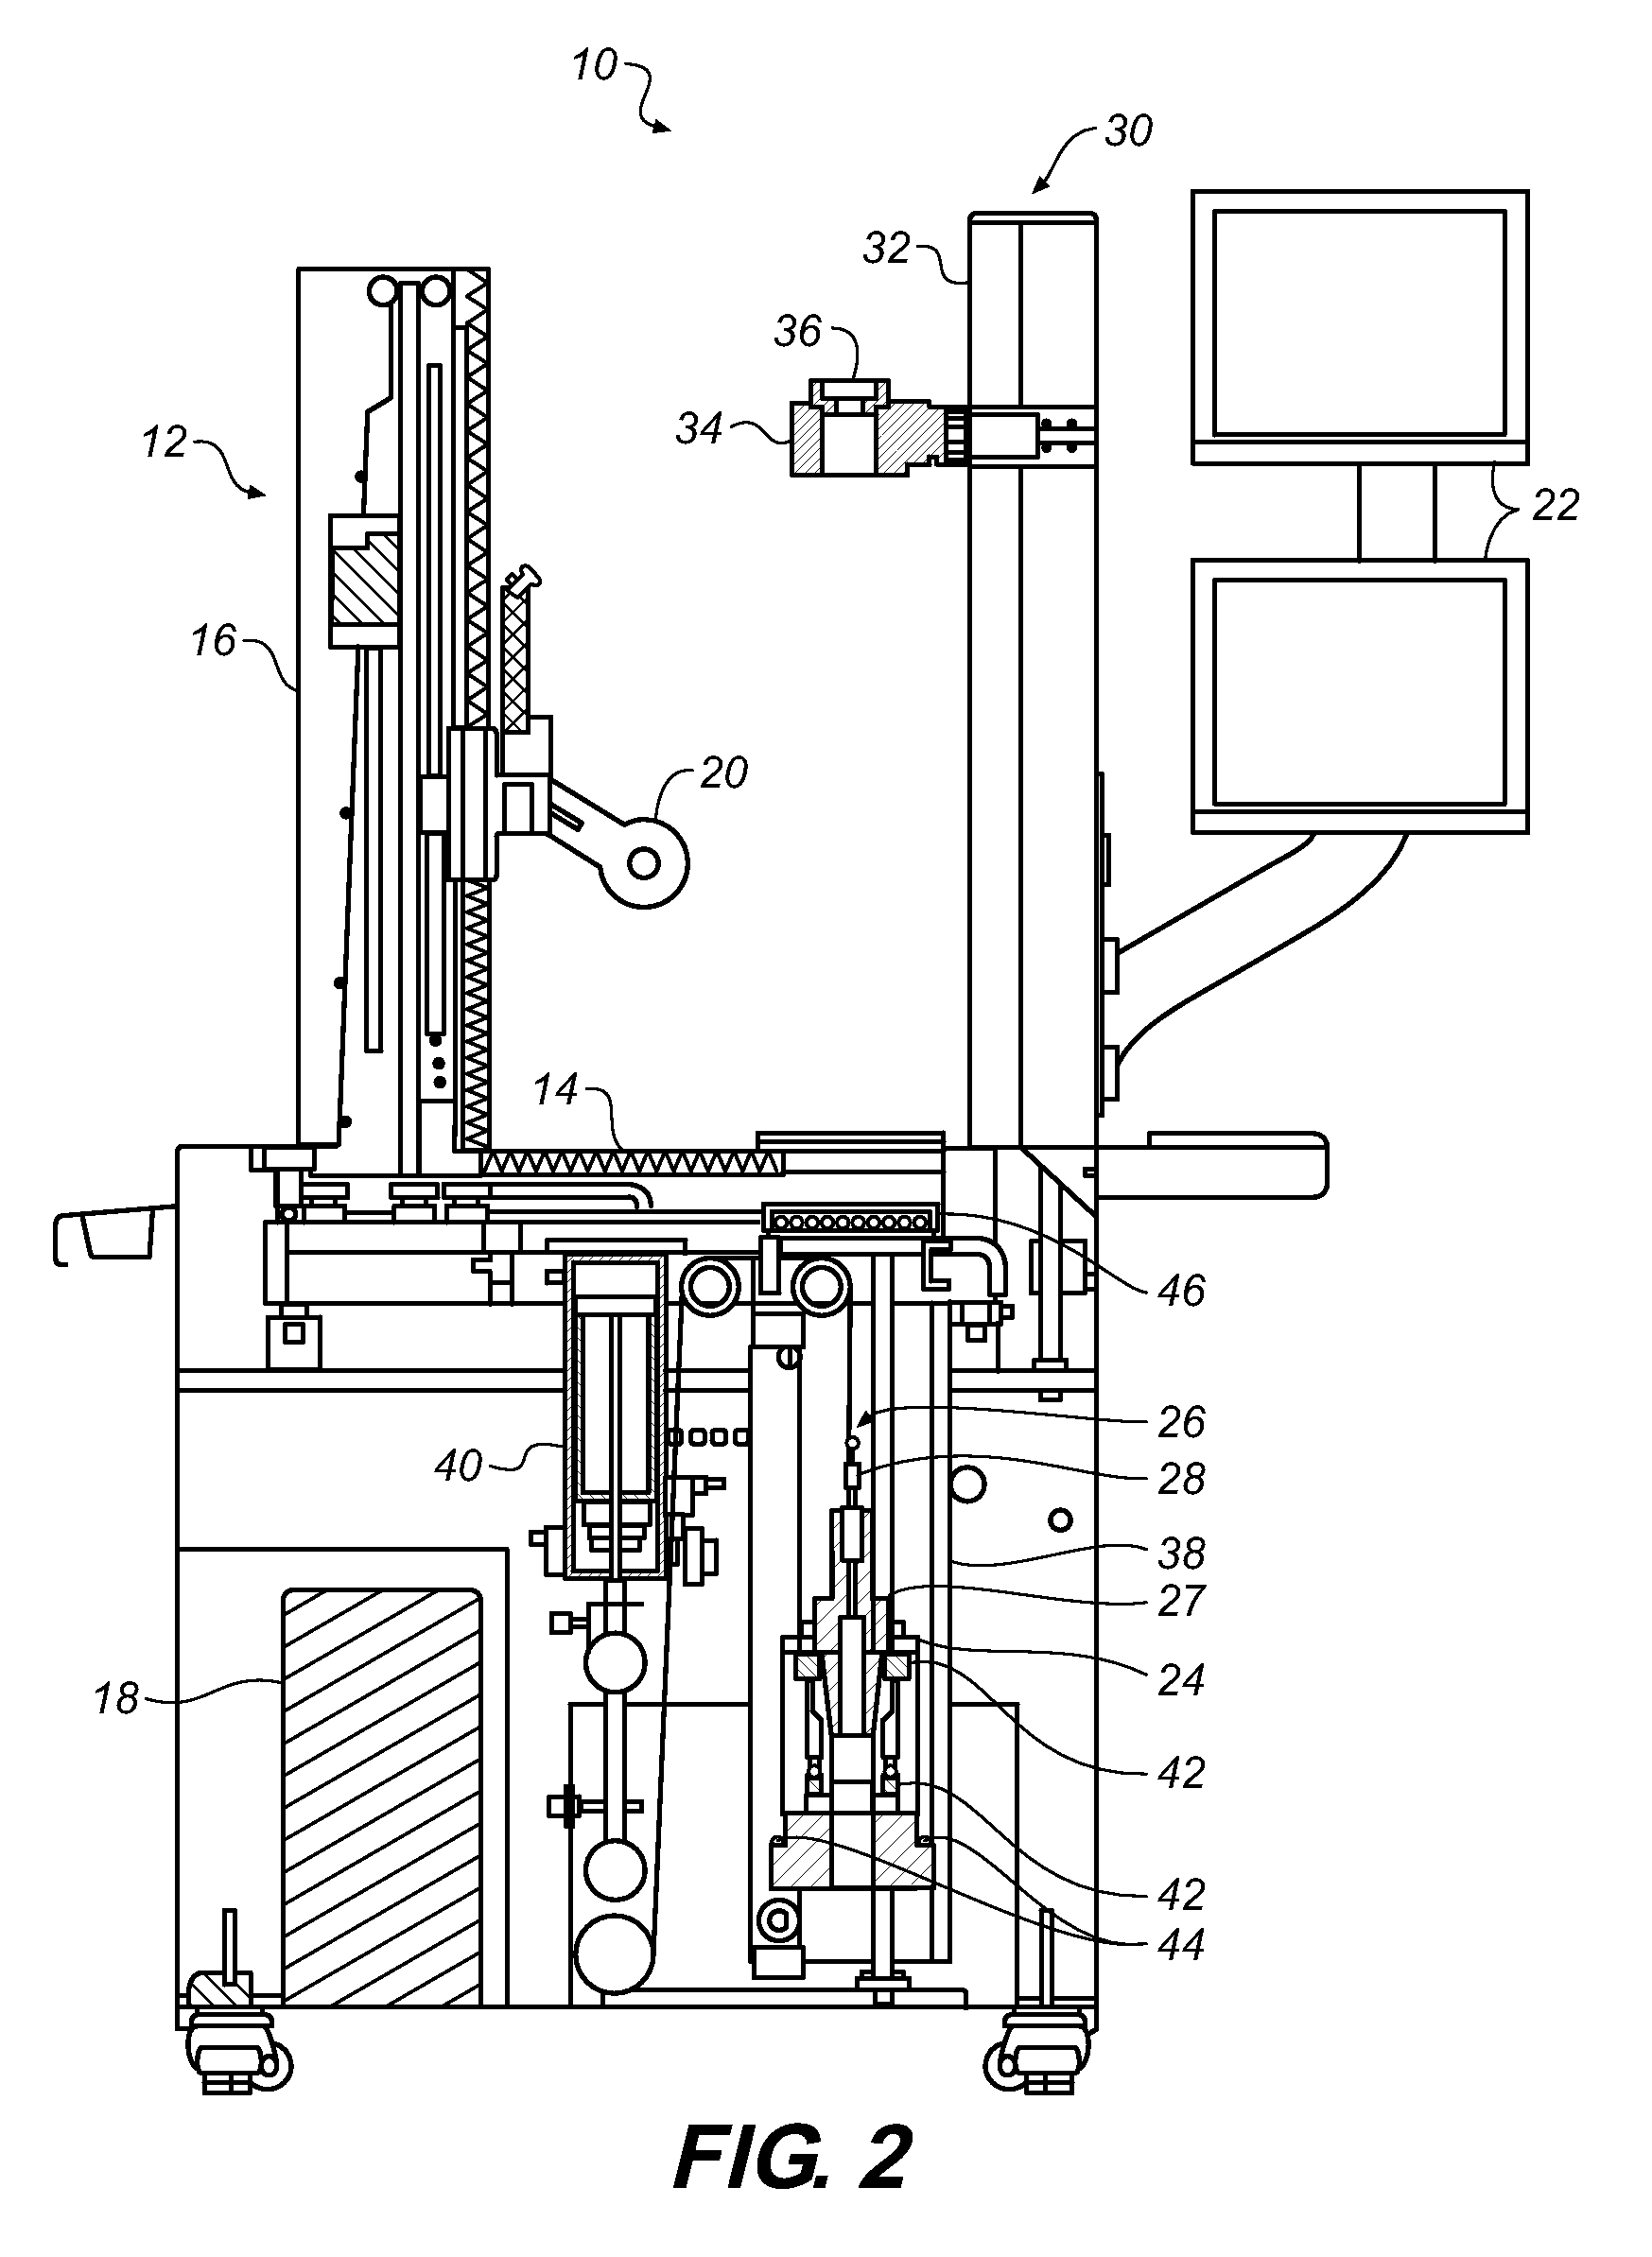 Combination tool presetter and induction heat-shrink apparatus